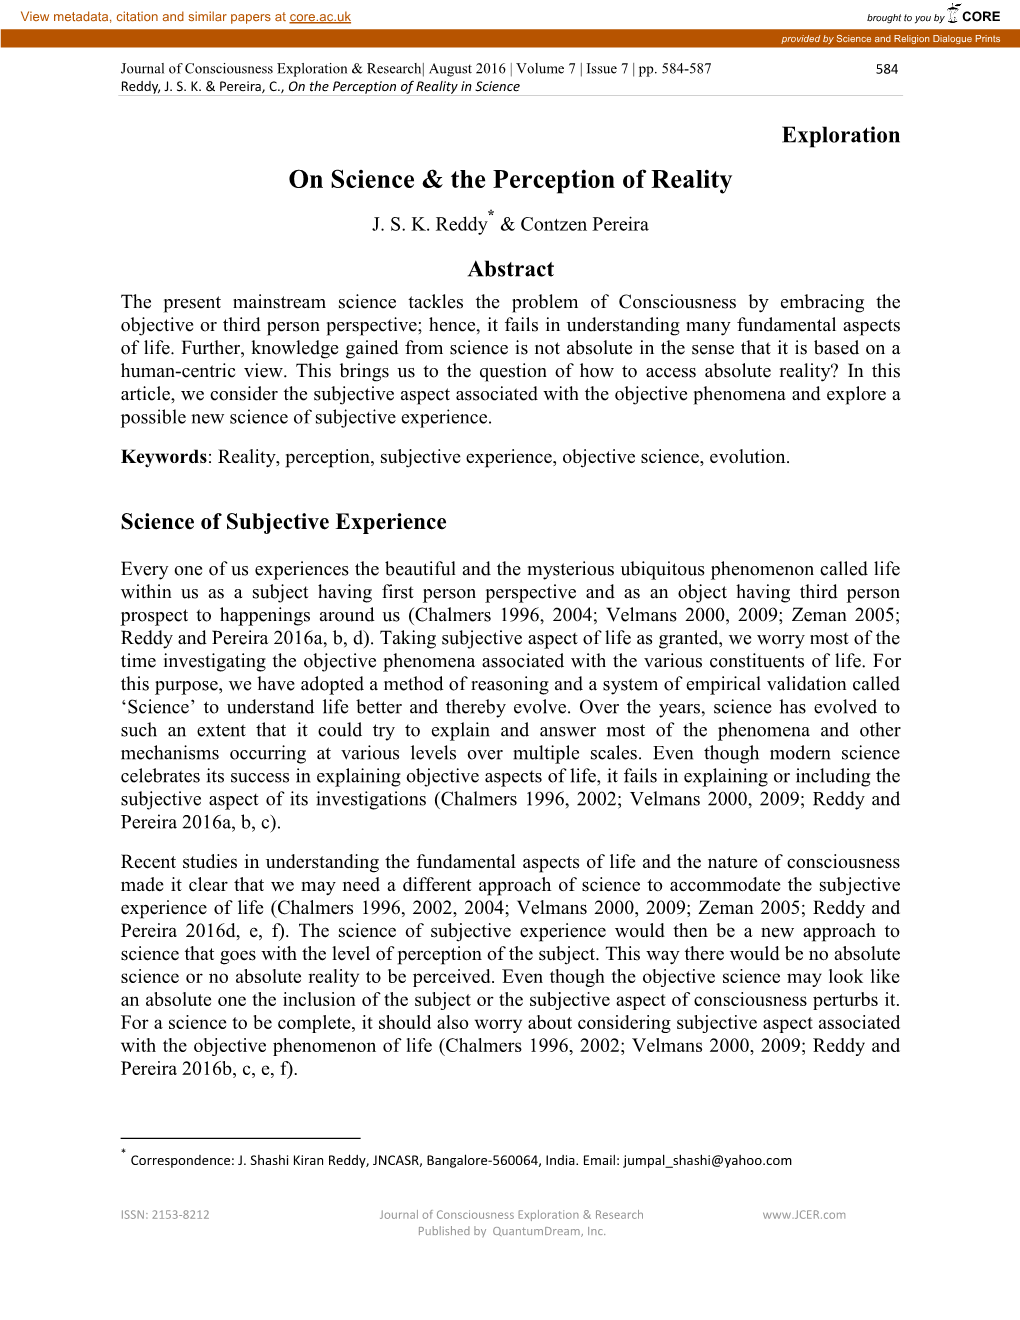 On Science & the Perception of Reality